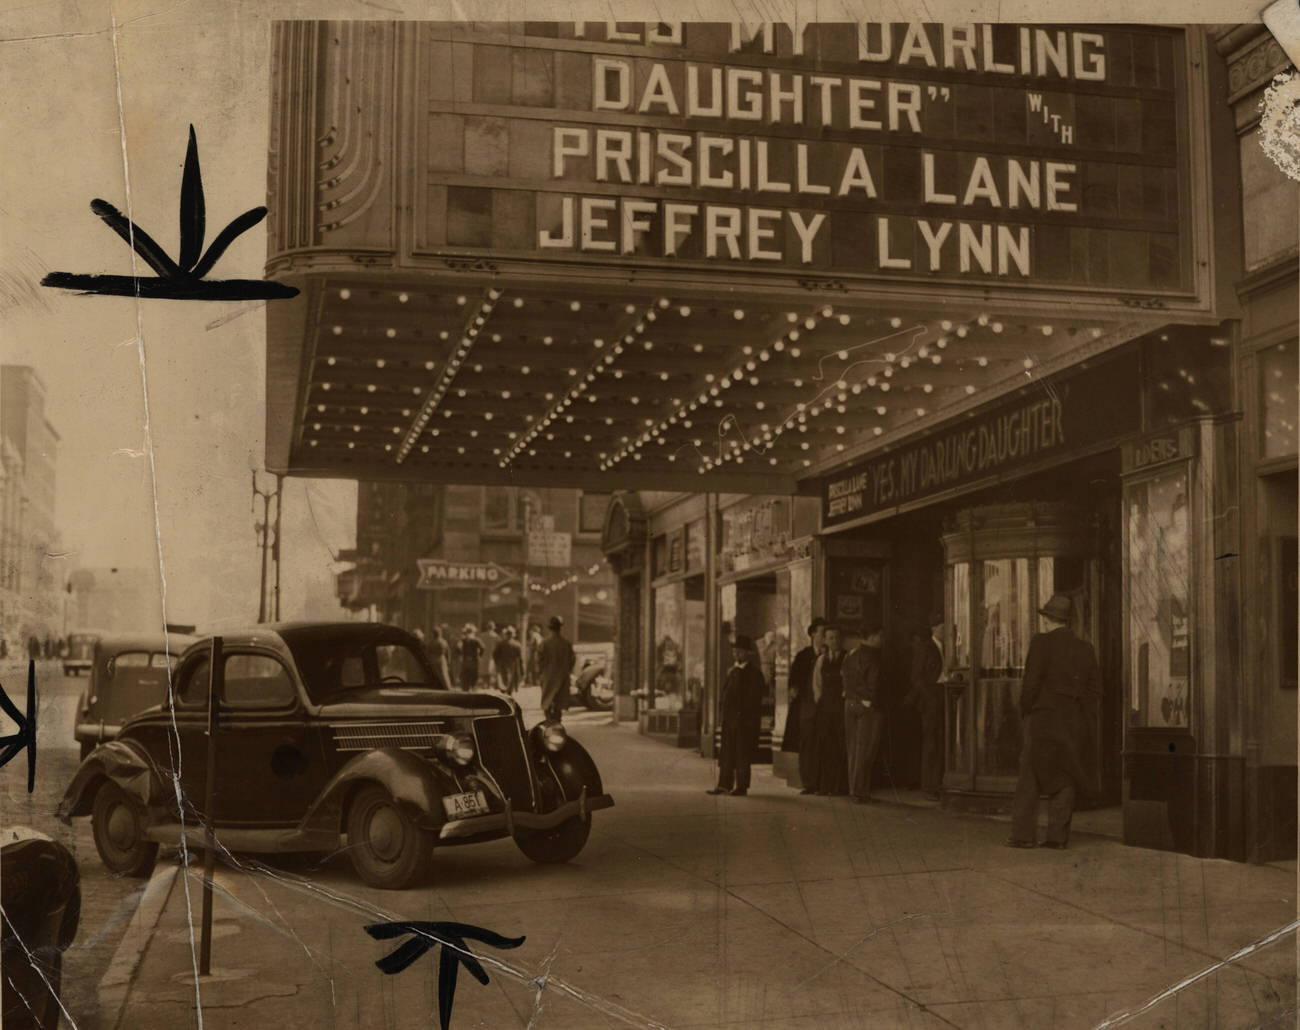 Automobile accident in front of Loew’s Broad Theater, featuring "Yes my darling daughter", 1933